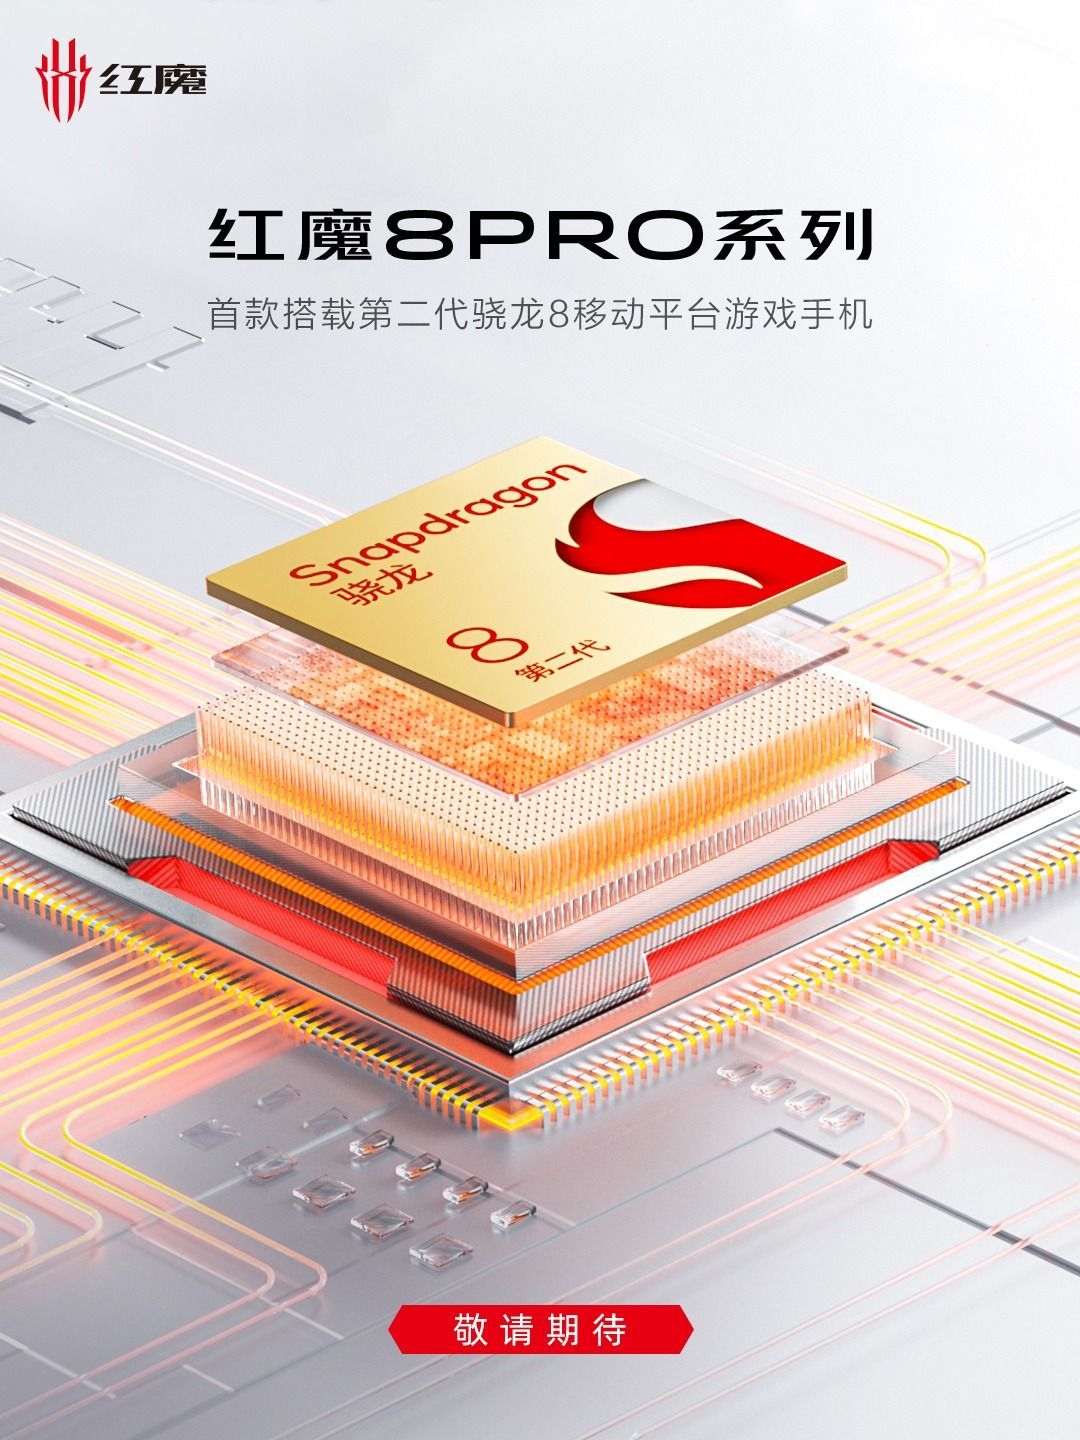 Red-Magic-8-Pro-Snapdragon-8-Gen-2 Announcement Poster